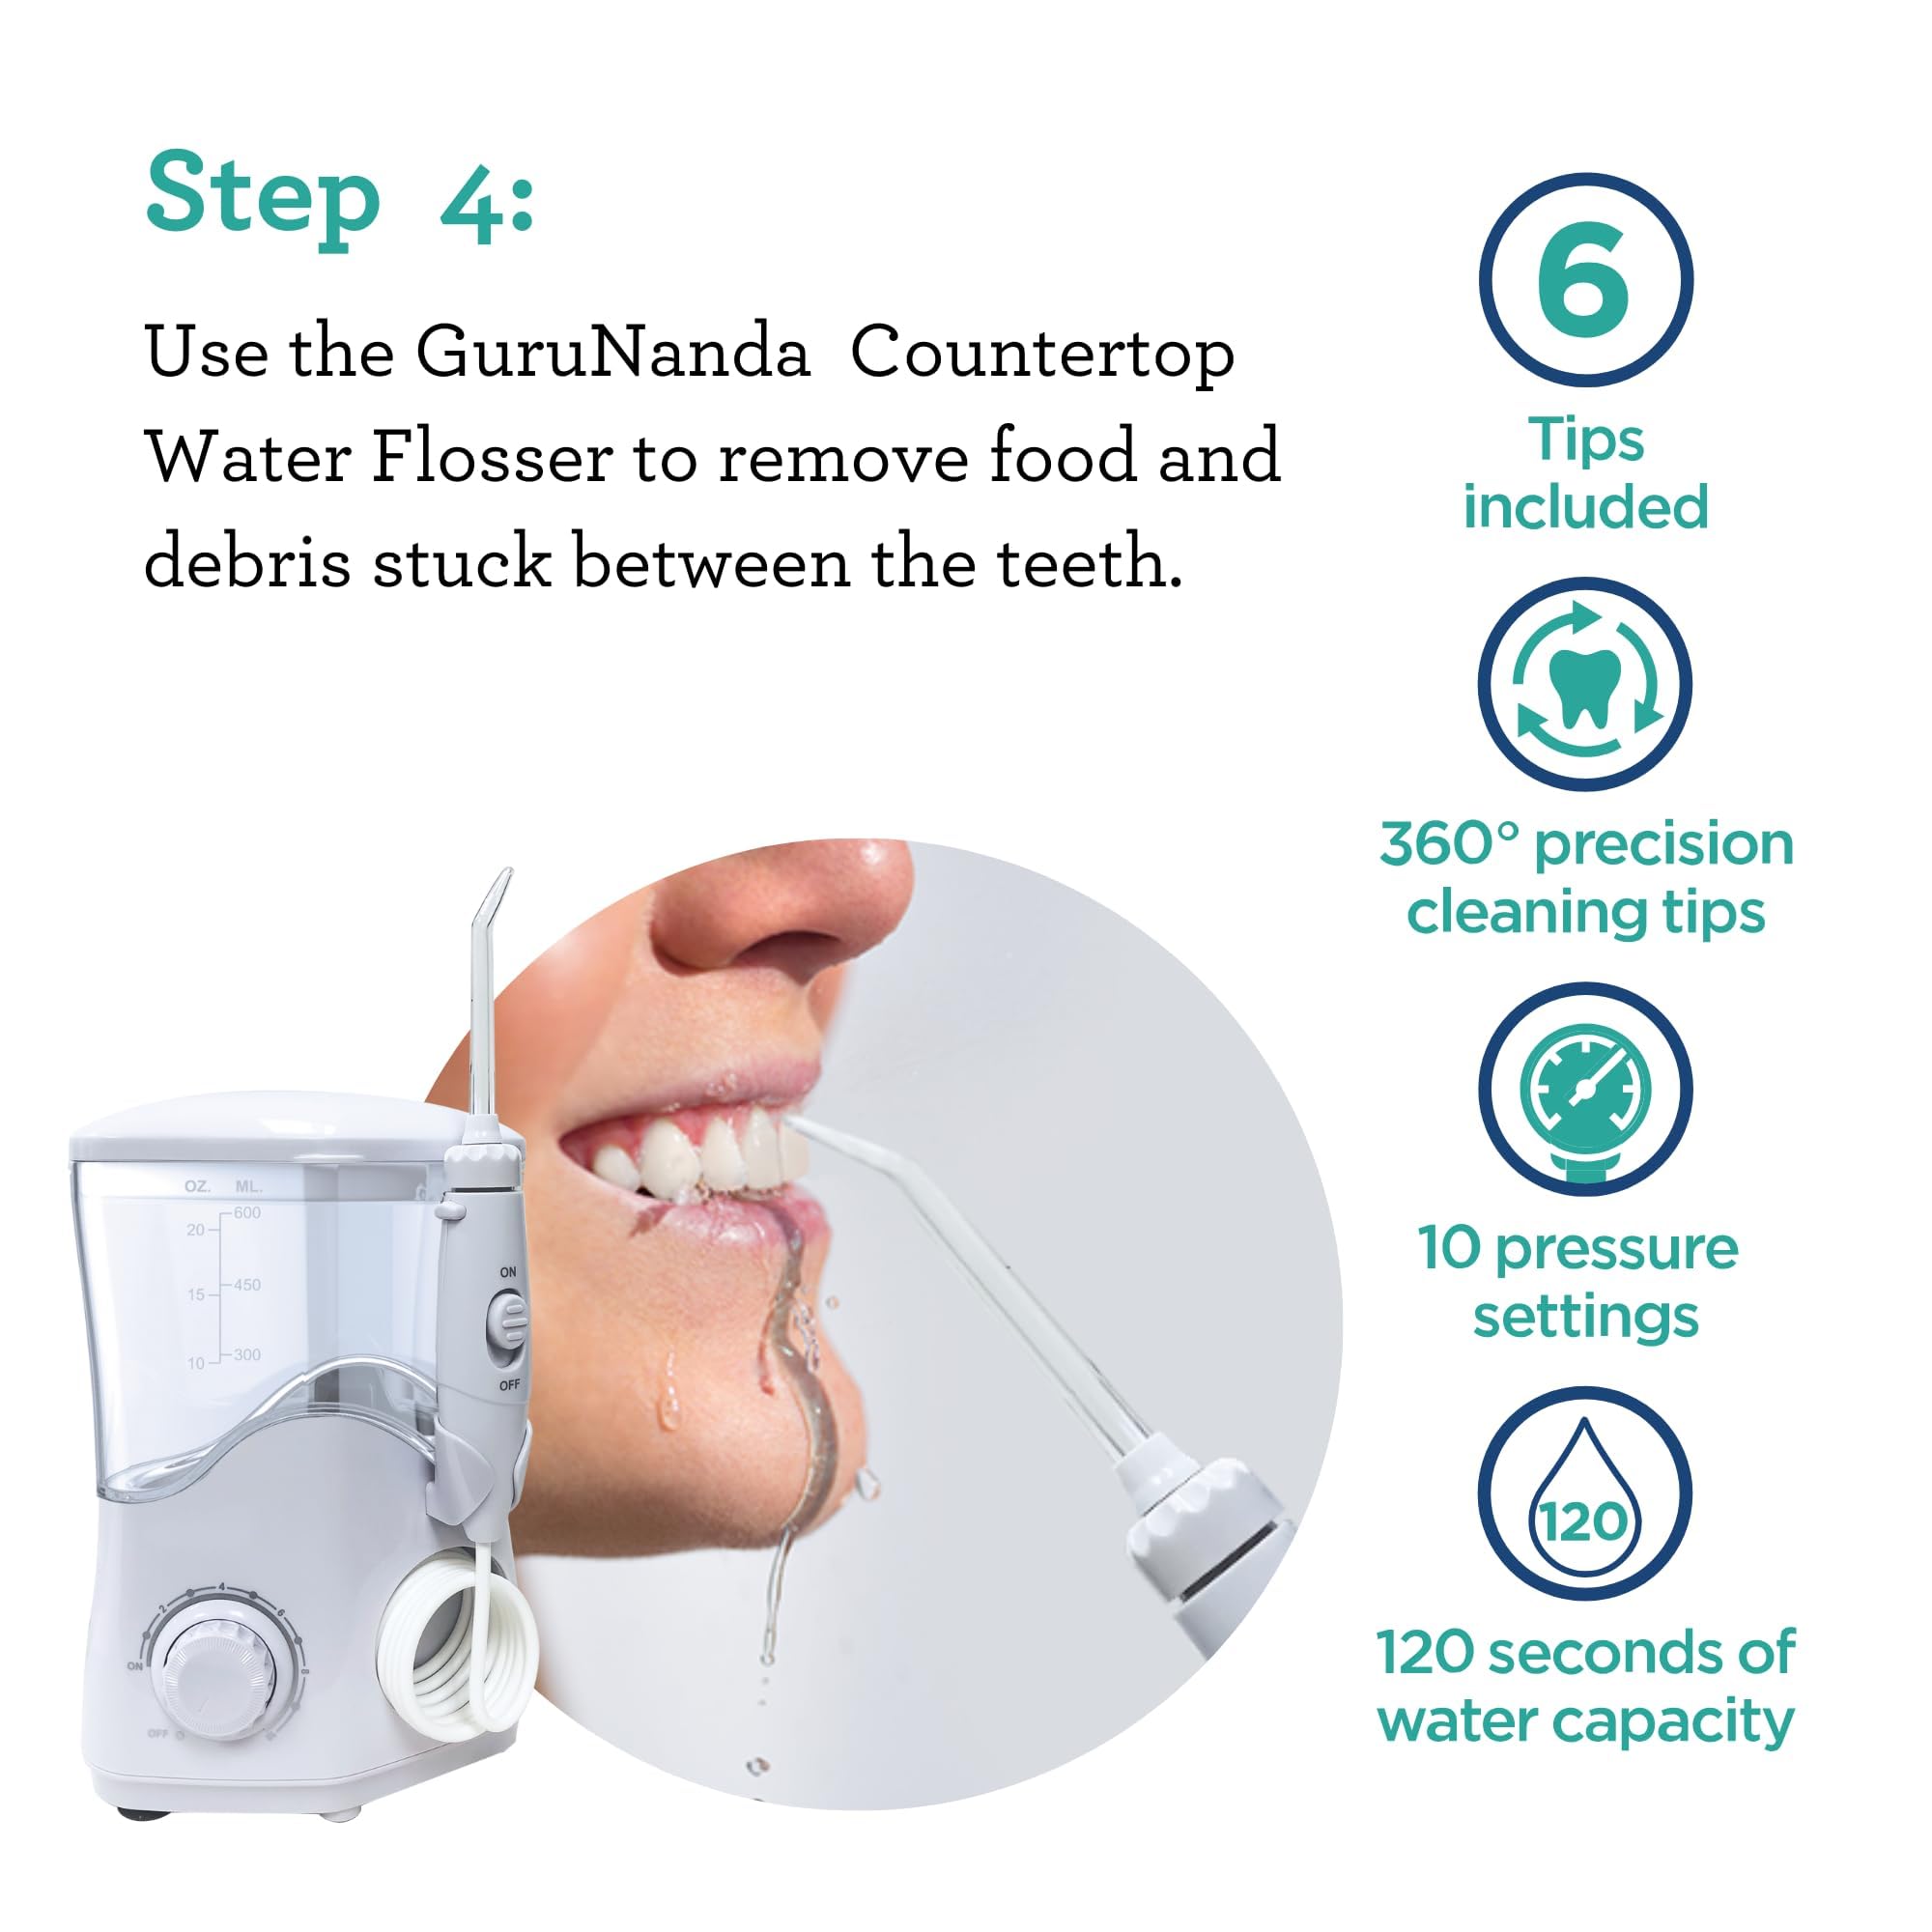 GuruNanda Better Gums Regimen 2.0 with CocoMint Pulling Oil, Butter on Gums Toothbrush, Table Top Water Flosser, Concentrated Mouthwash & Dual Barrel Mouthwash - 5 Count